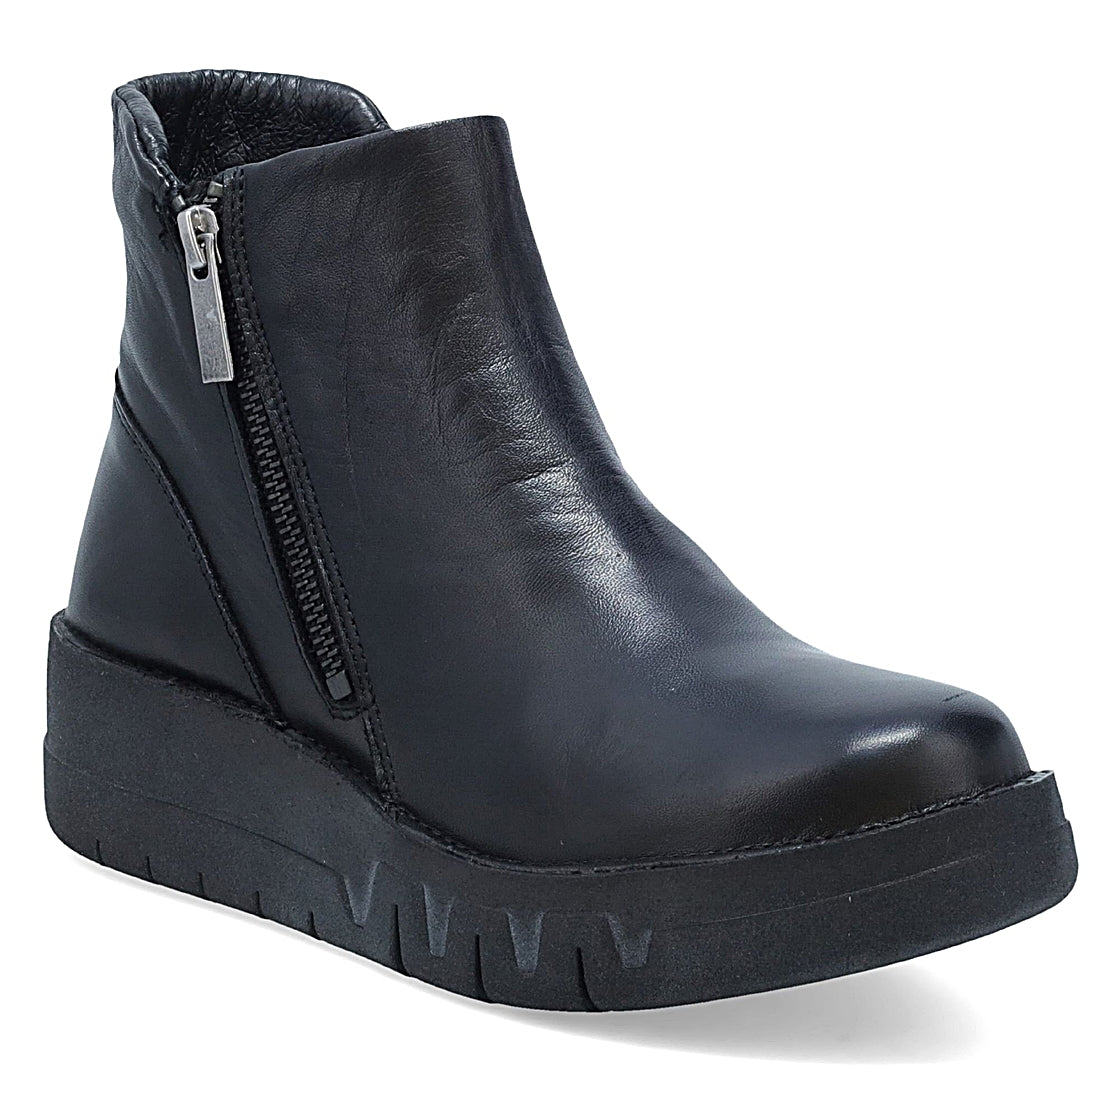 front outer side view of the miz mooz lass boot. This boot is in black and has a wedge heel. The outer side has a zipper.